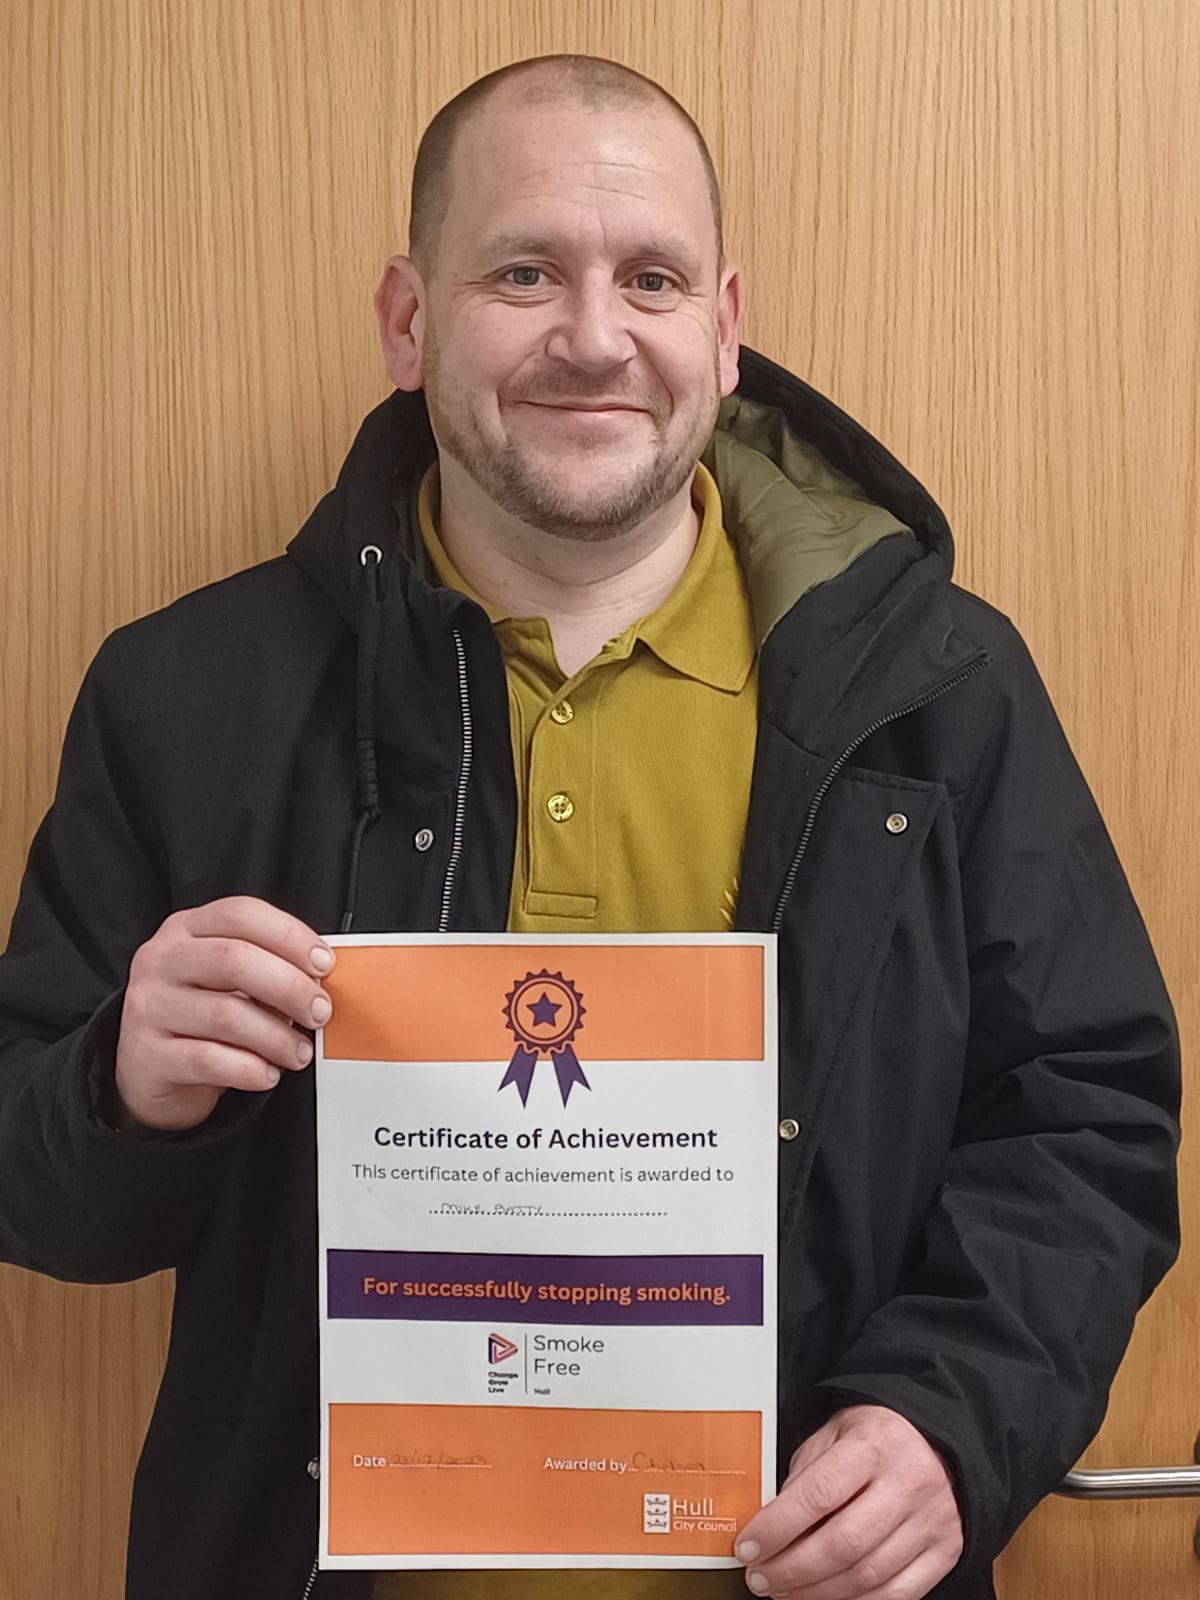 A man holding up a certificate